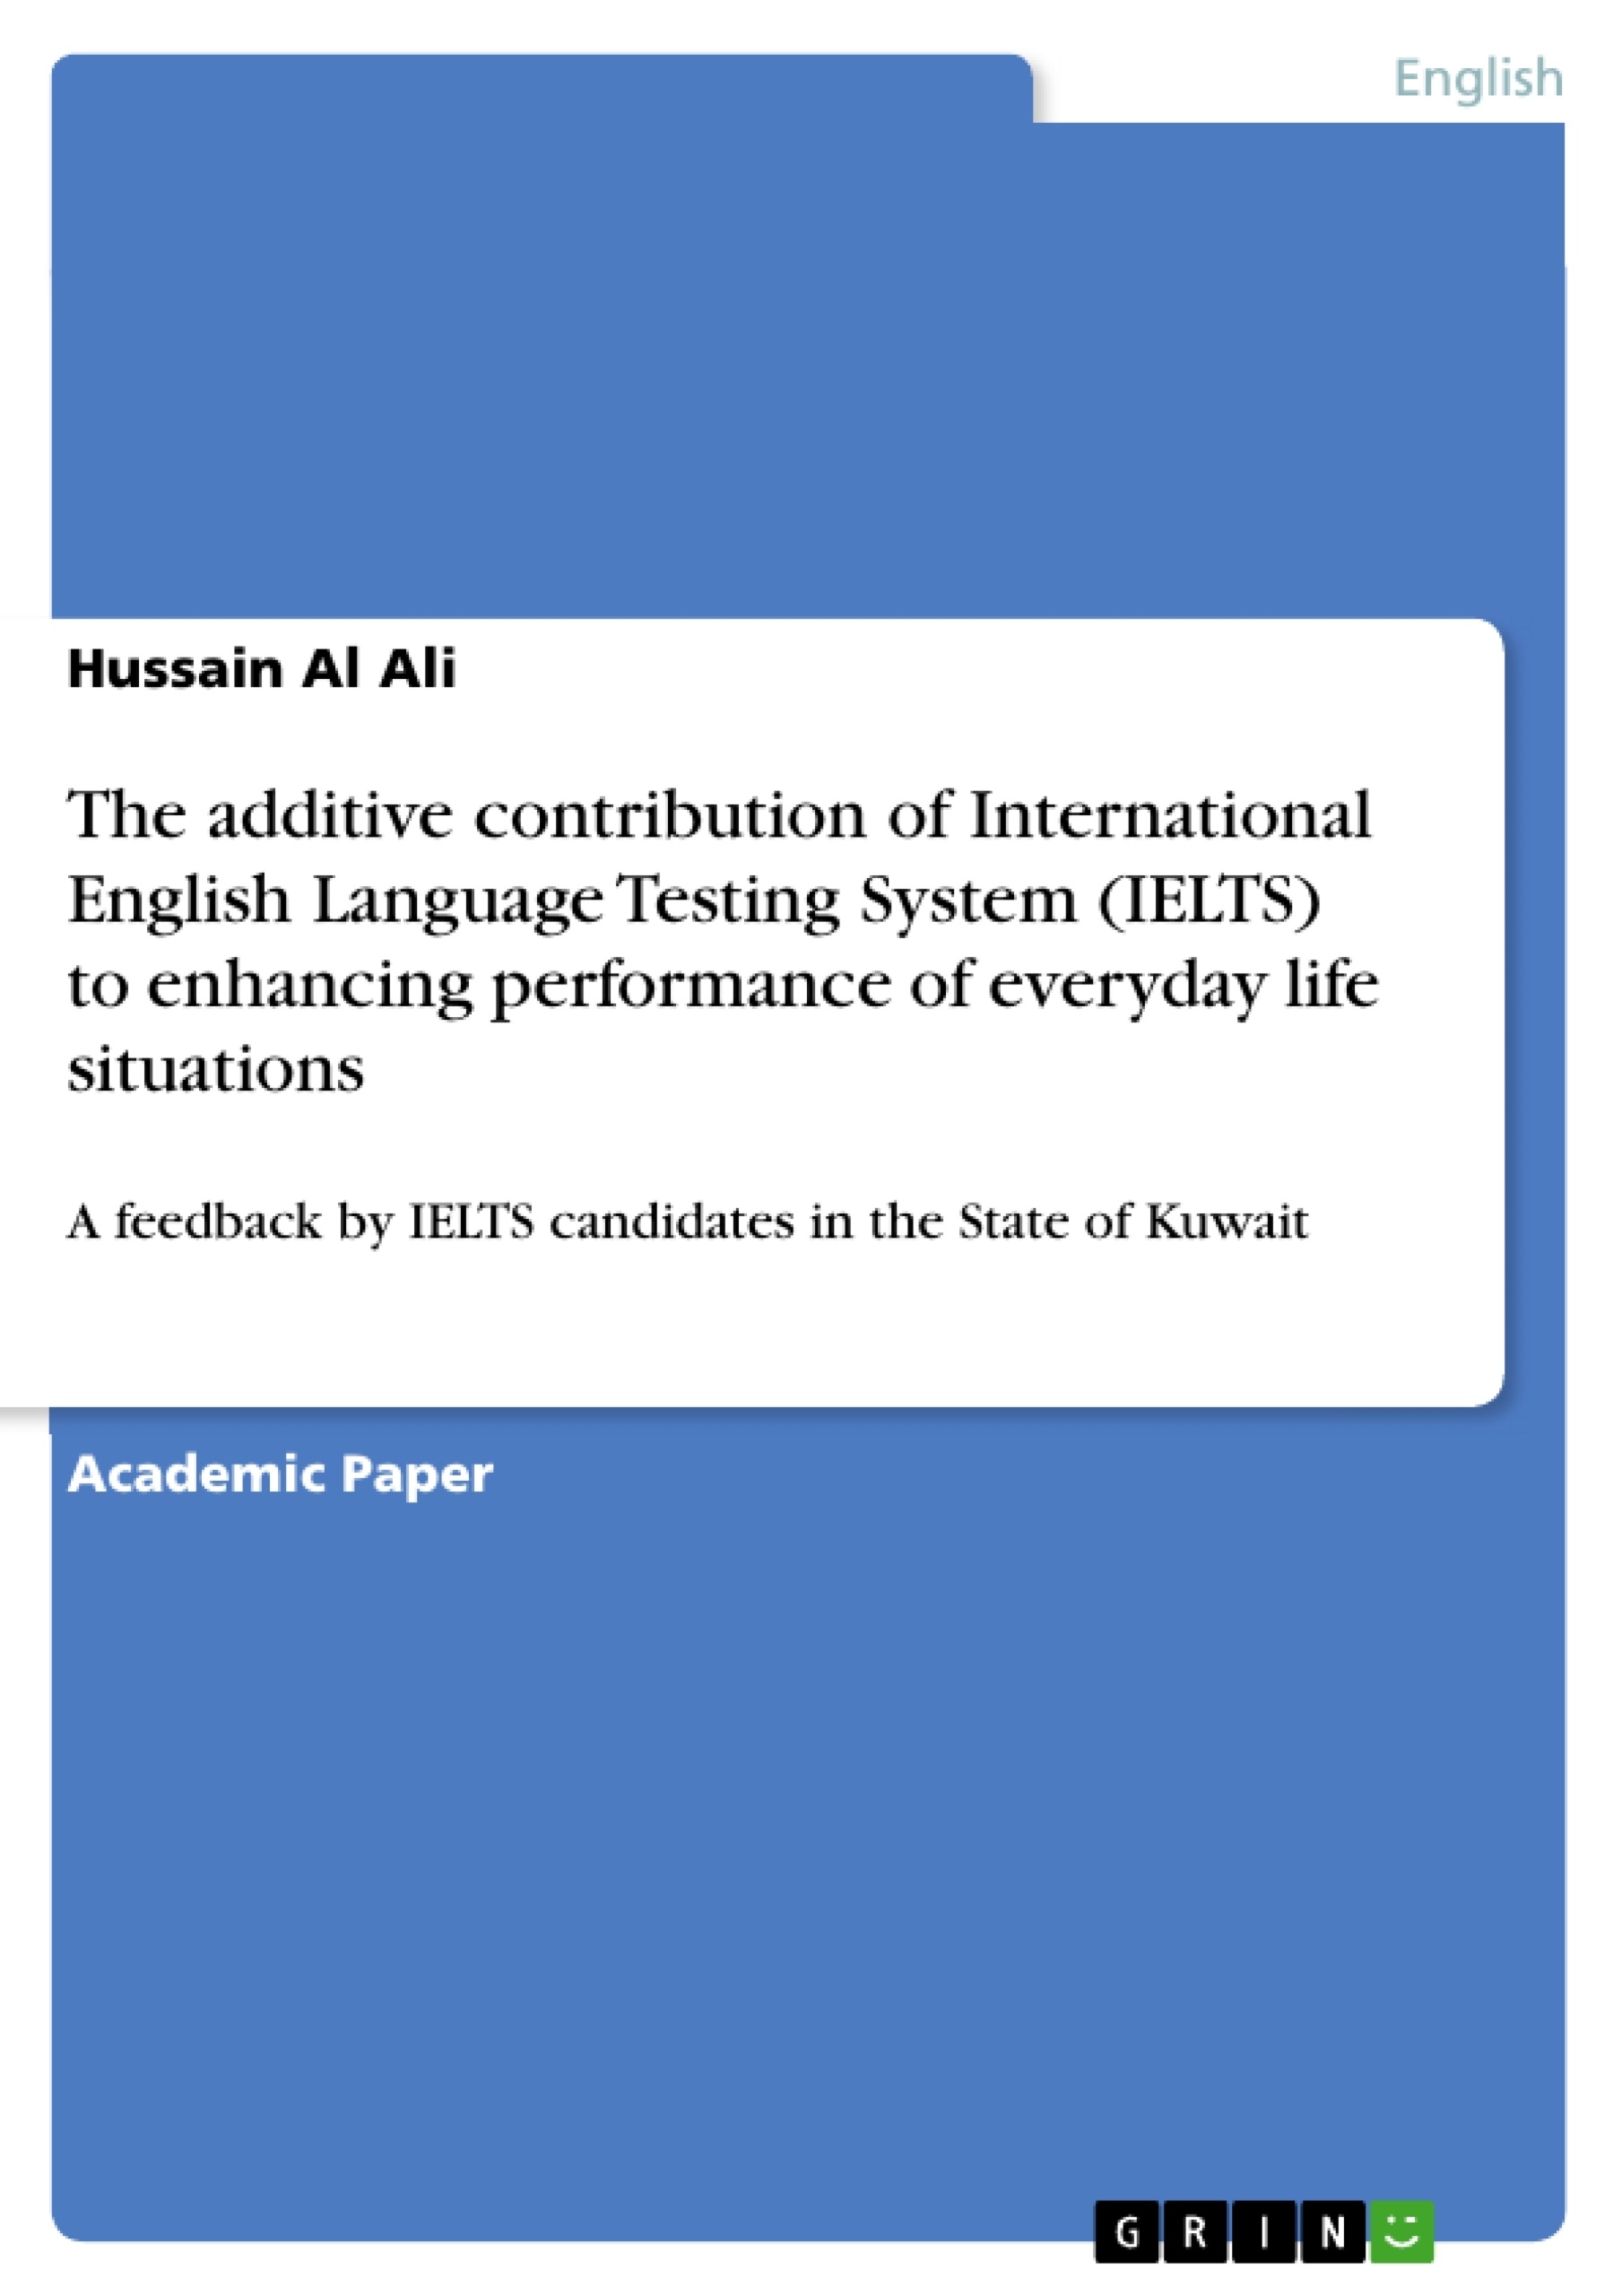 Titre: The additive contribution of International English Language Testing System (IELTS) to enhancing performance of everyday life situations